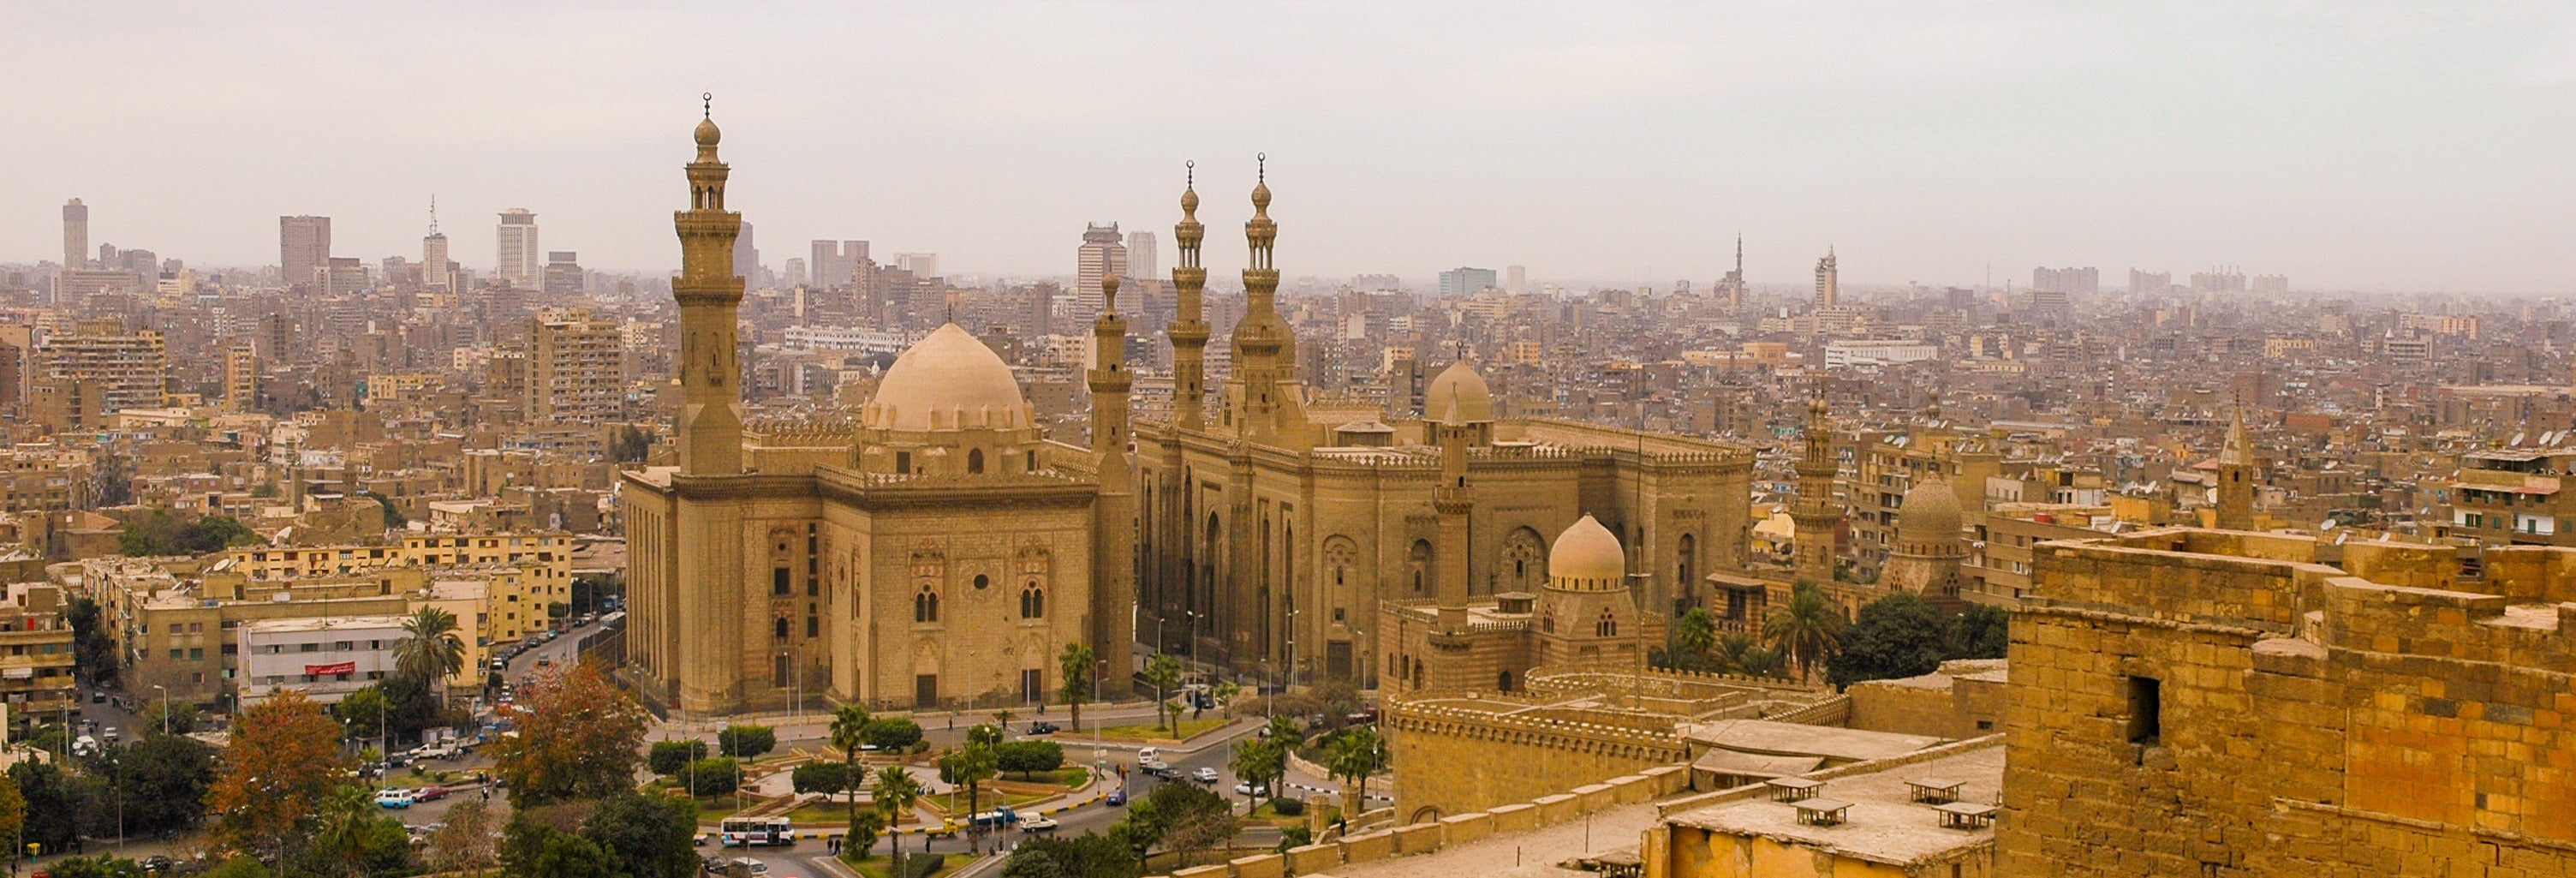 Historic Tour of the Fatimid Caliphate's Cairo